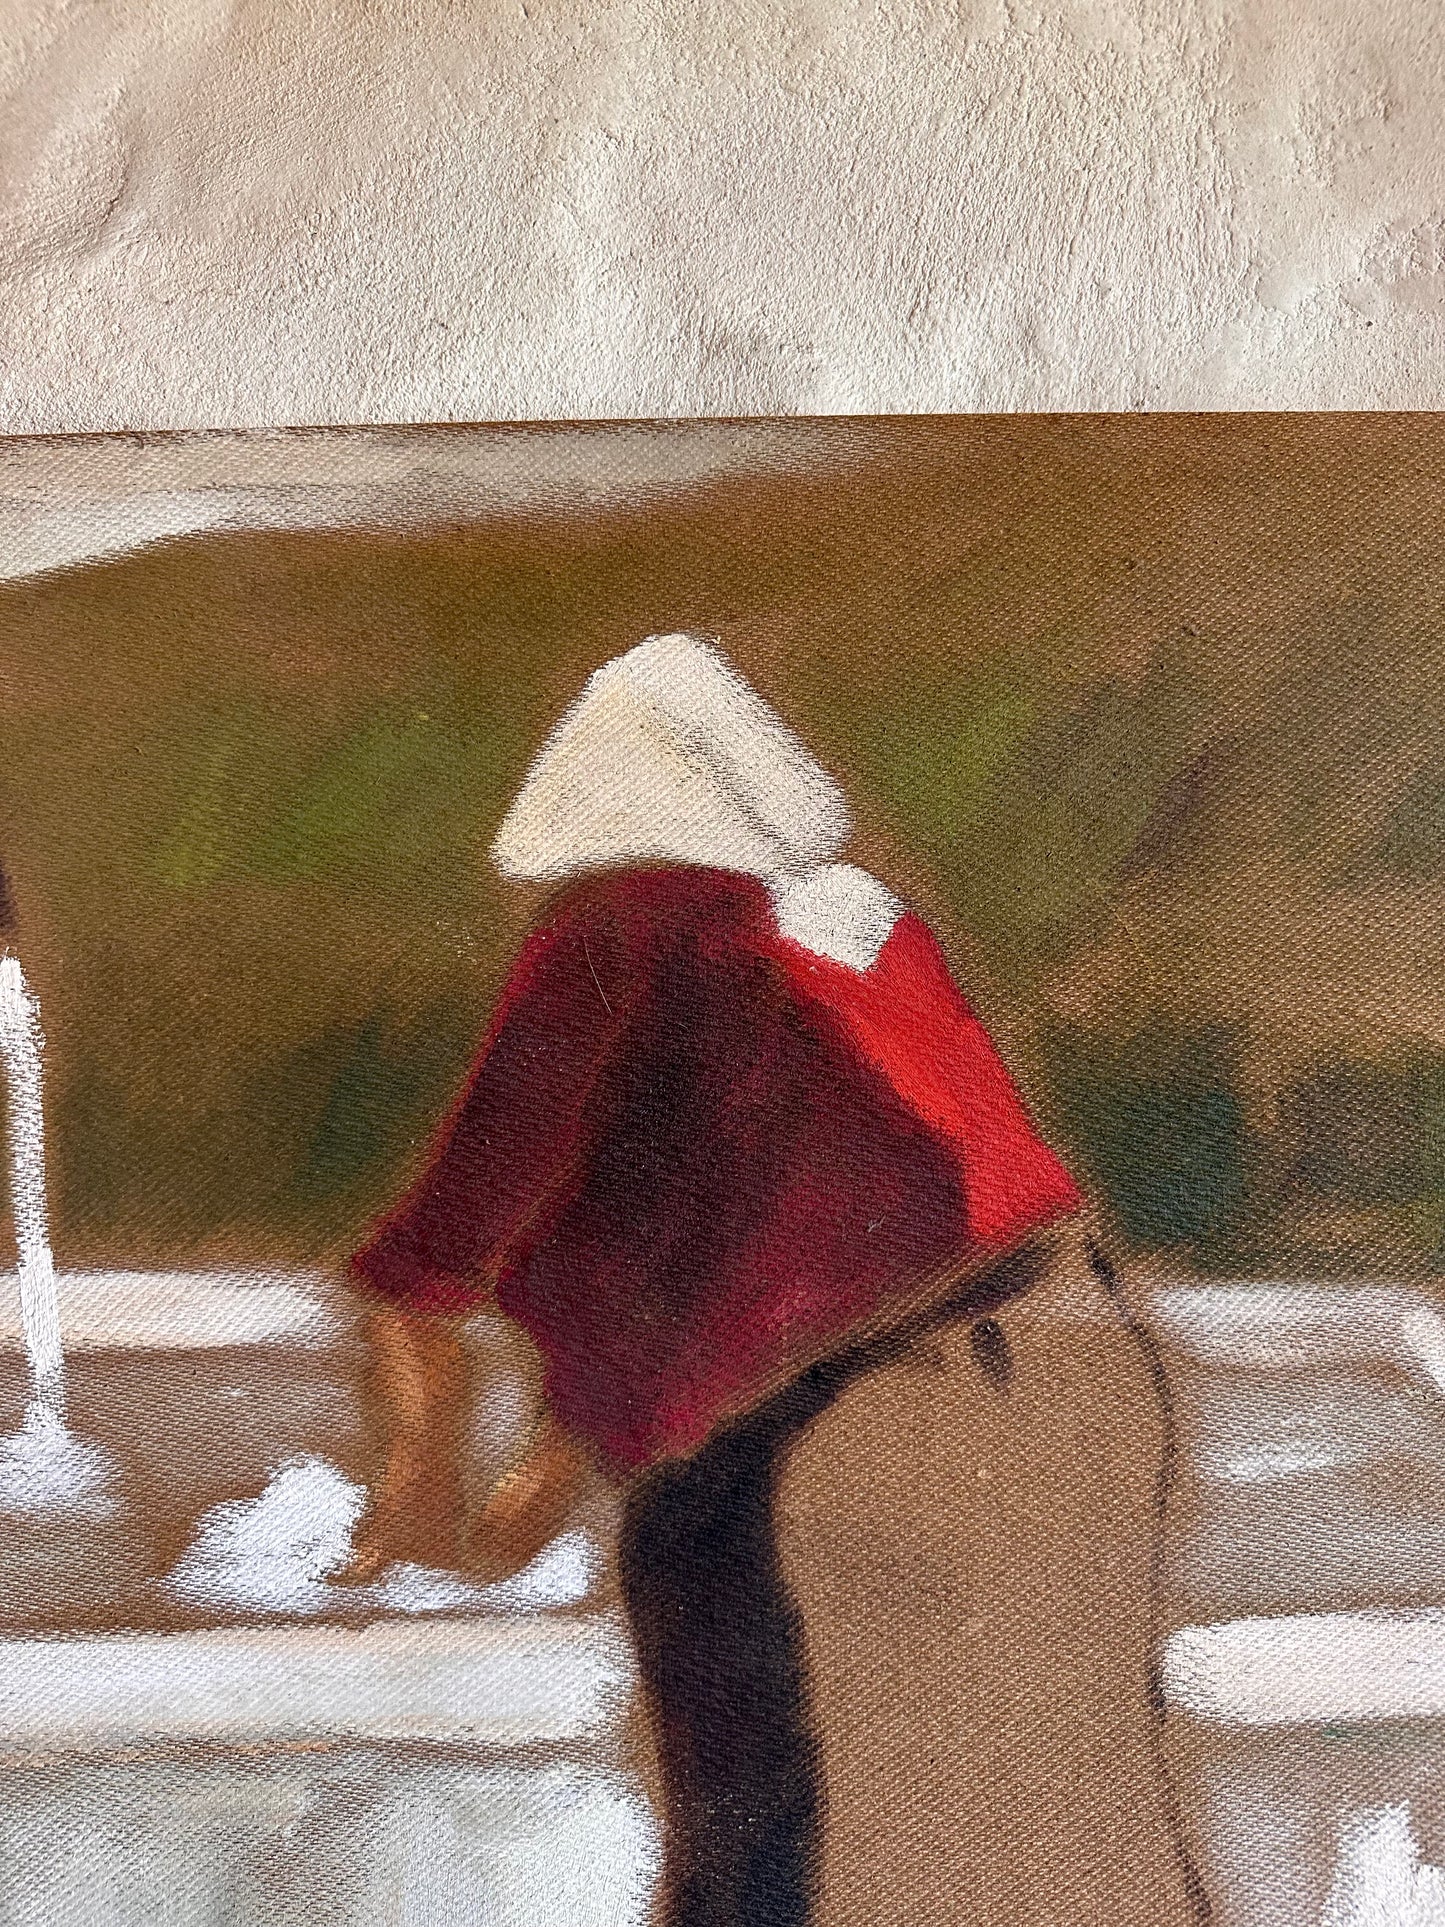 Nonna Doing Laundry (in Italy) Painting